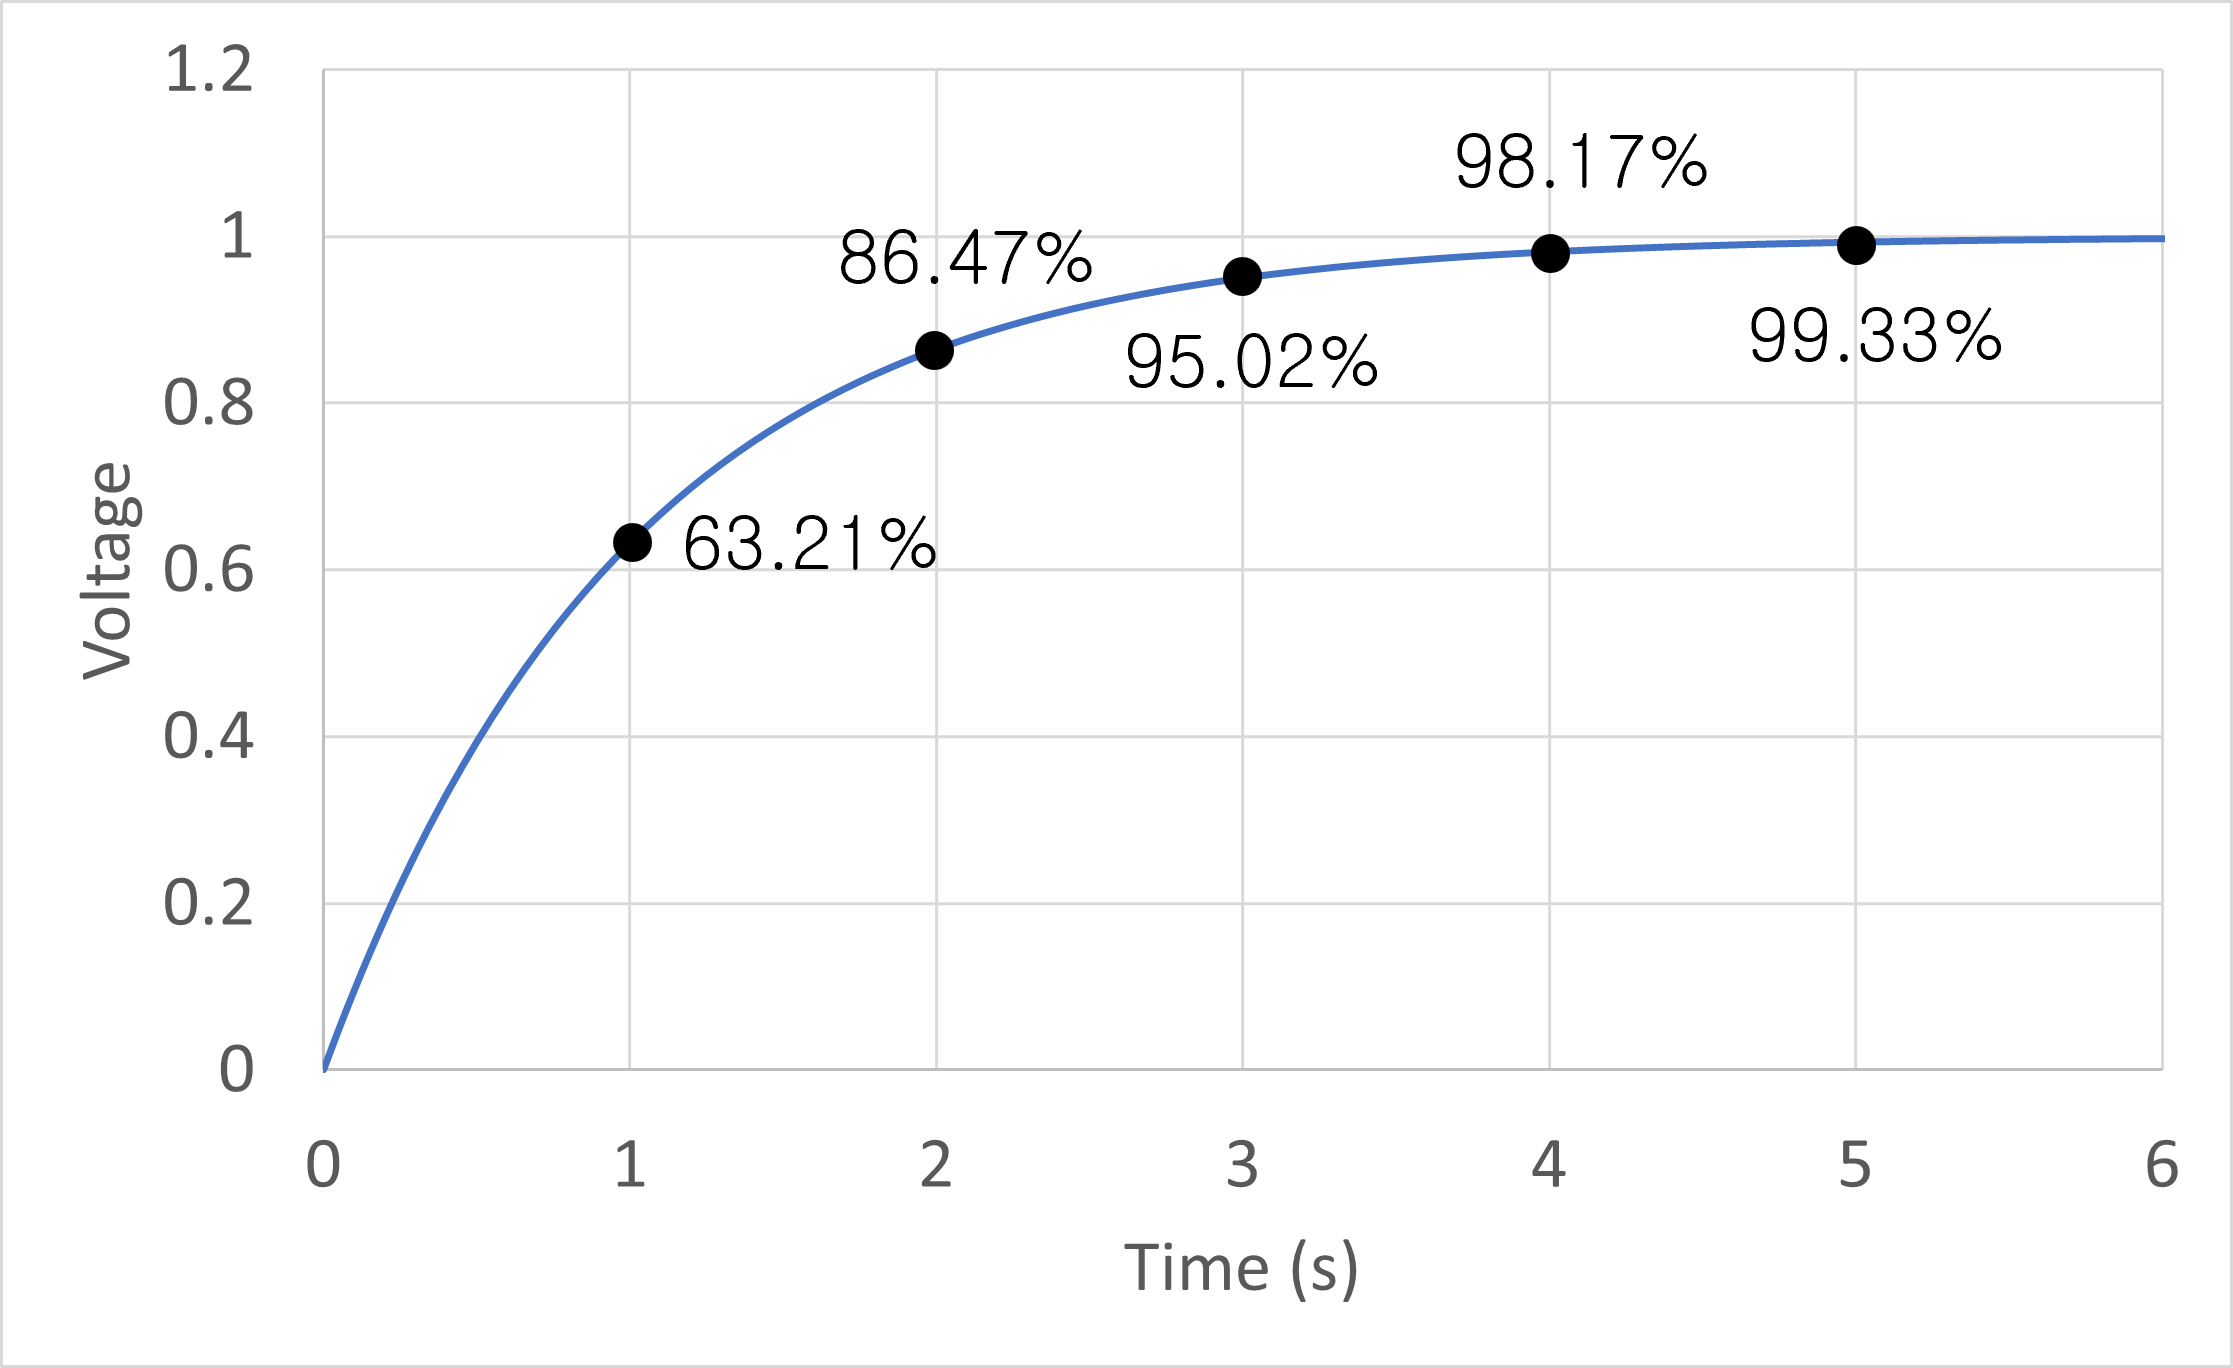 Capacitor's characteristic graph